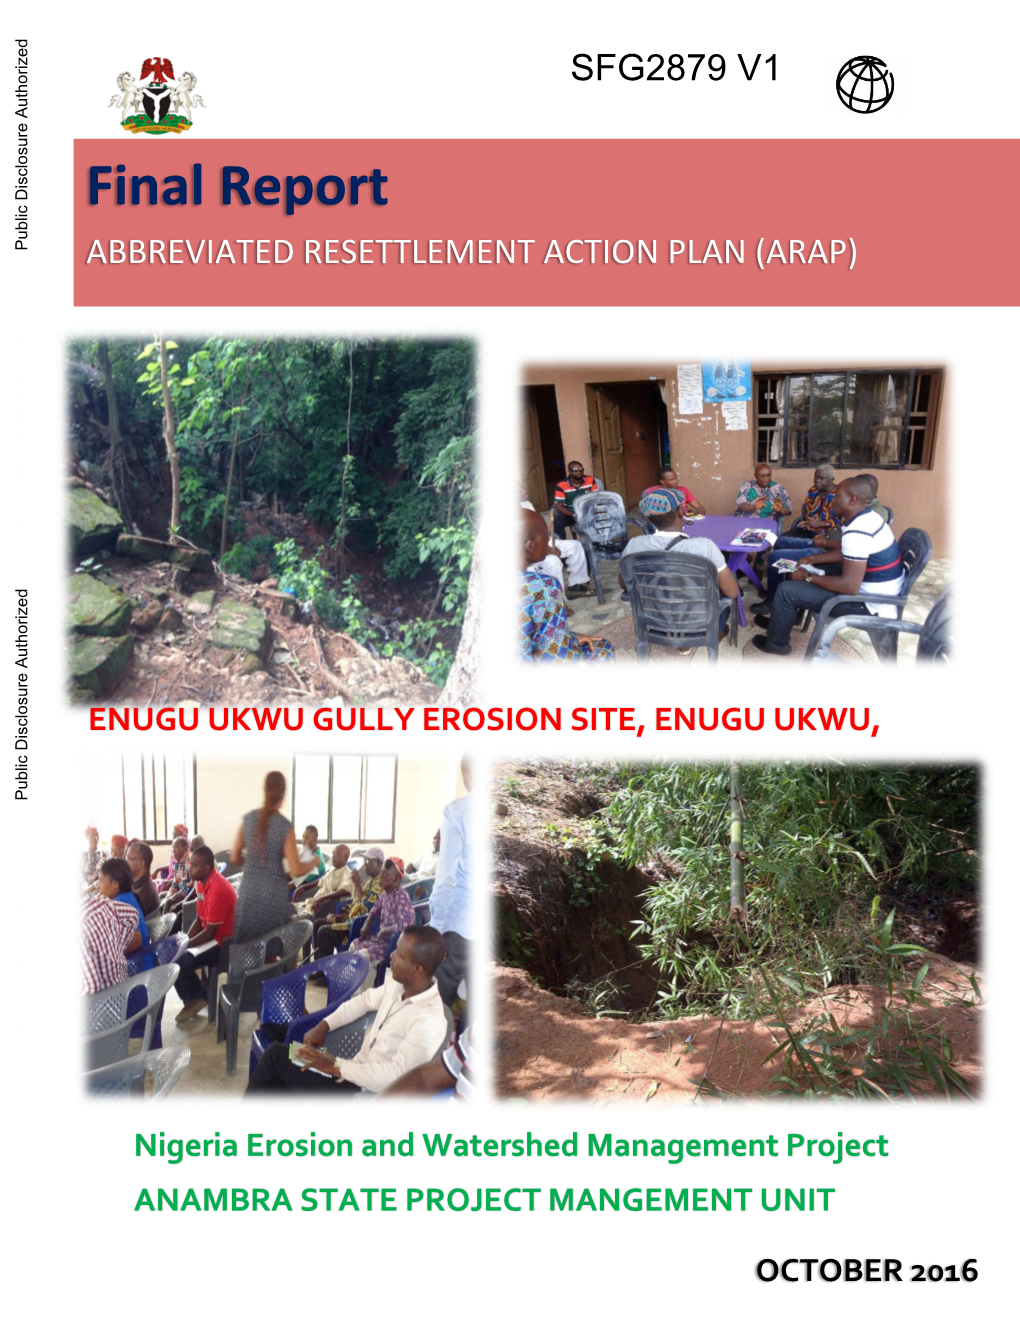 Nigeria Erosion and Watershed Management Project ANAMBRA STATE PROJECT MANGEMENT UNIT